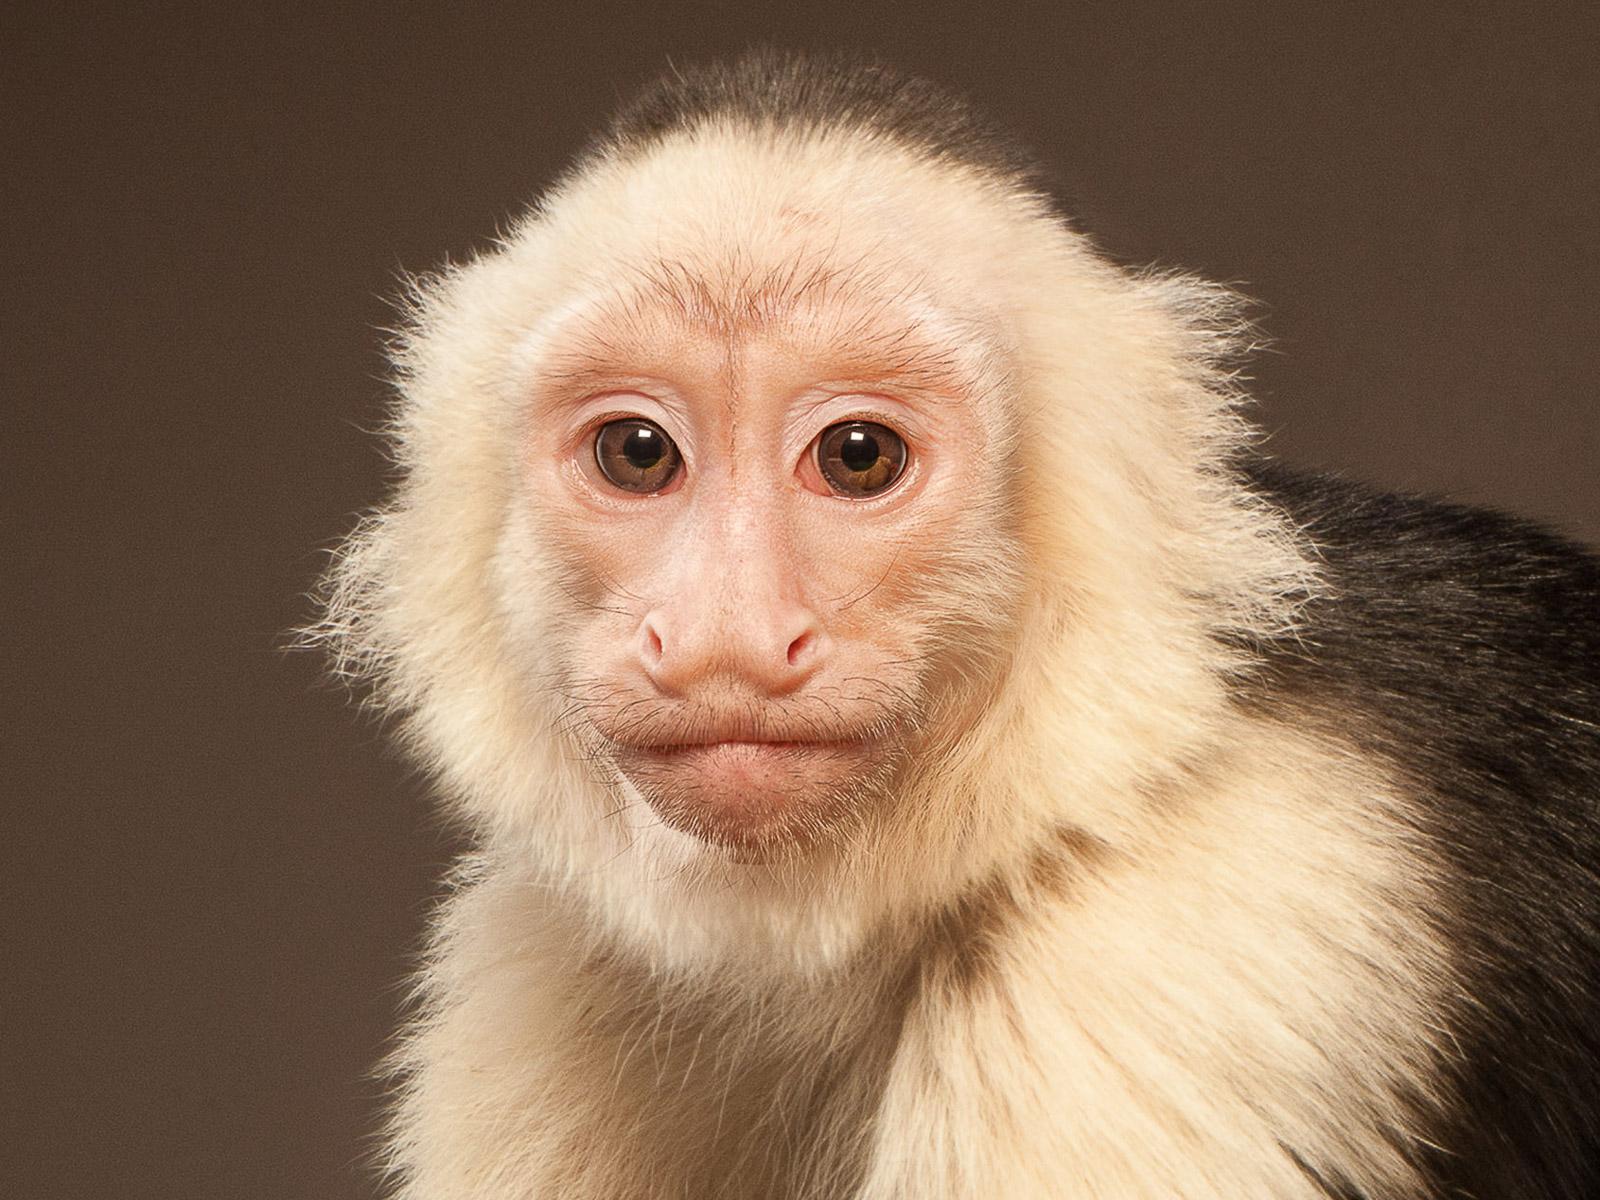 Capuchin 1 -  Signed limited edition archival pigment print  -  Edition of 3

A series of three portrait images of a Capuchin monkey in a stylised painterly style. This portraits are inspired by my fascination with animal intelligence. 

The